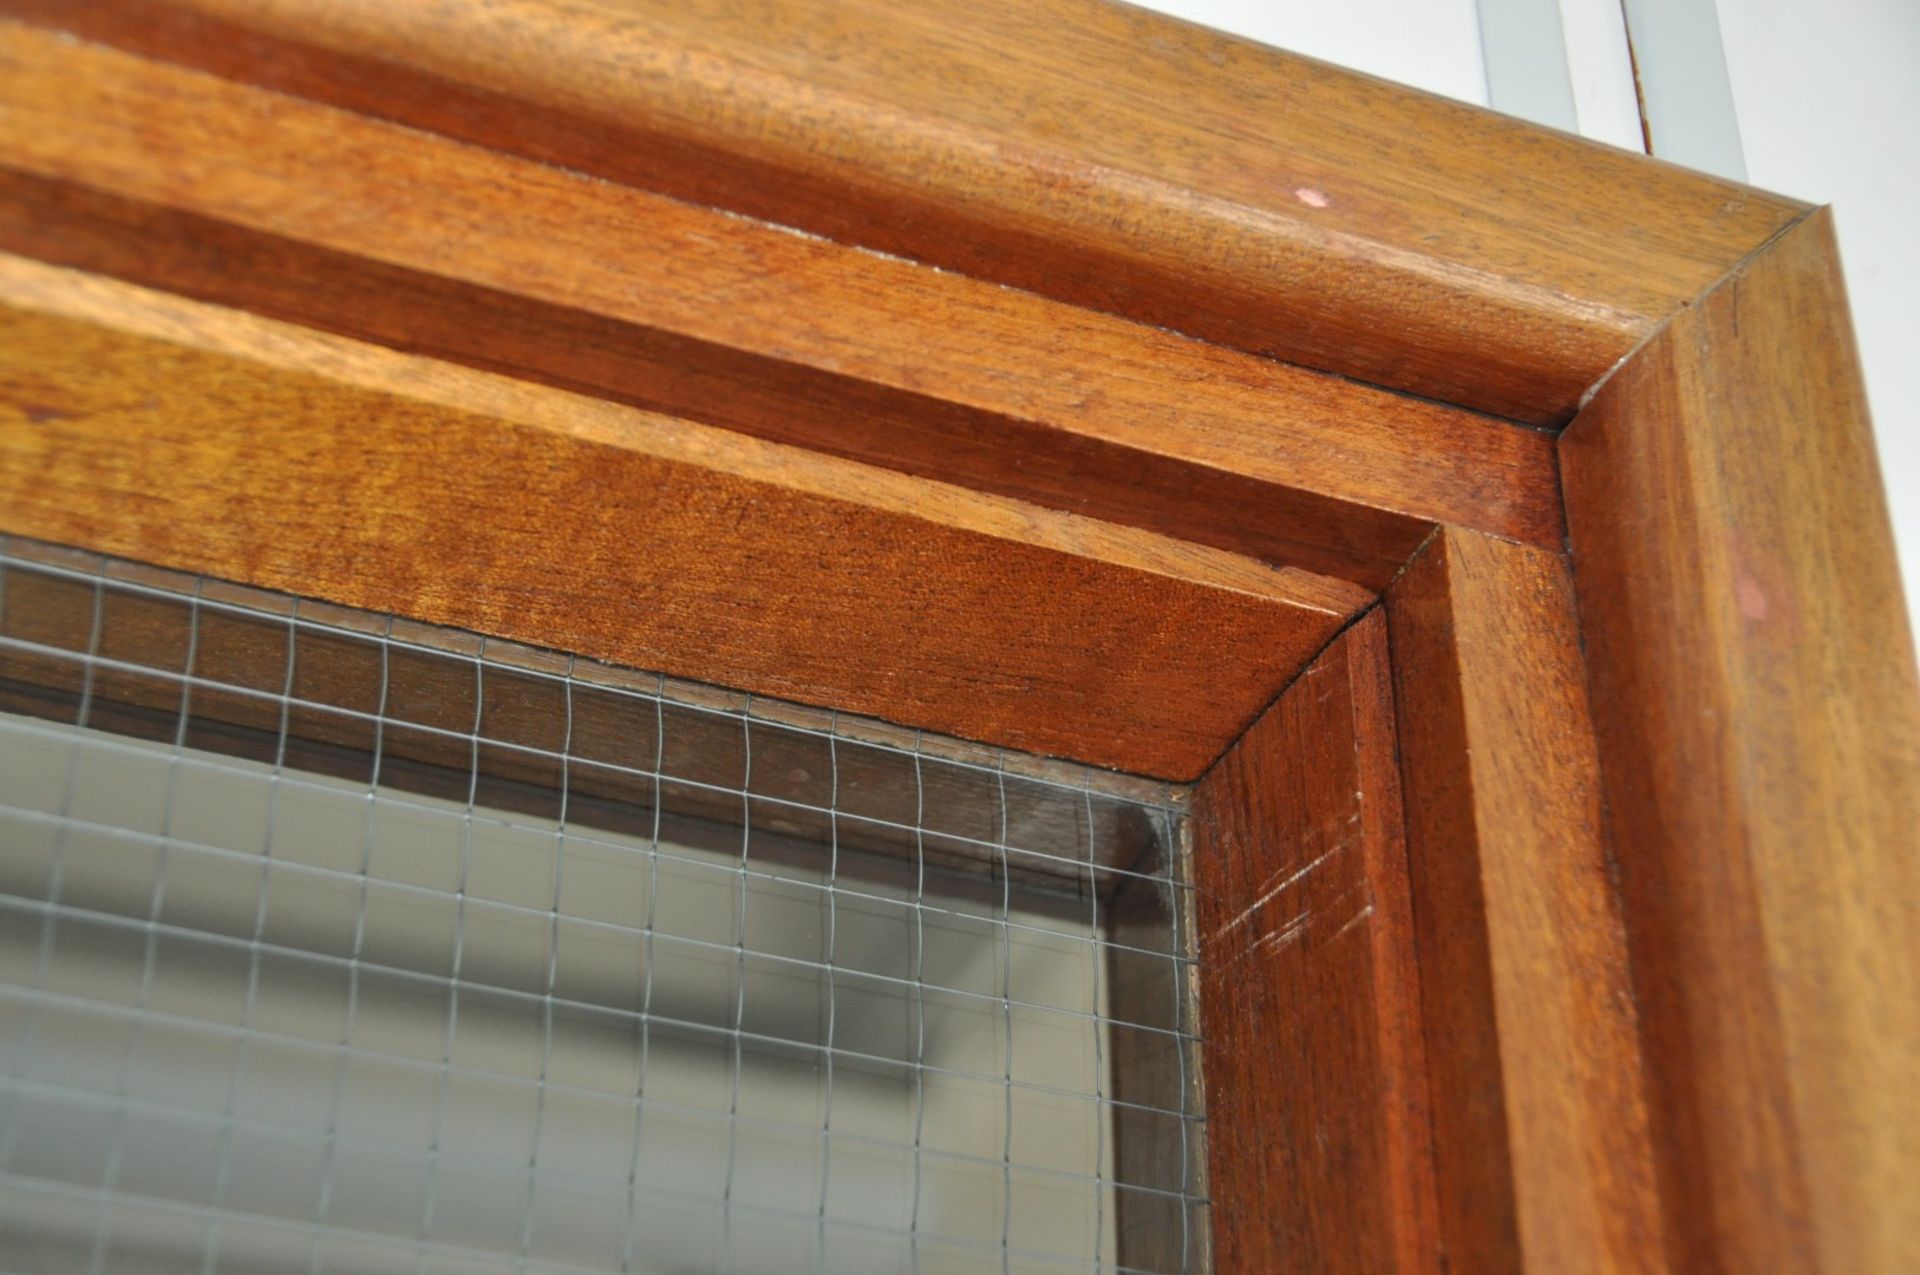 1 x Huge Vintage Oak Window Frame With Wire Mesh Security Glass - Size: 287 x 96 cms - Approx 9 Feet - Image 2 of 3